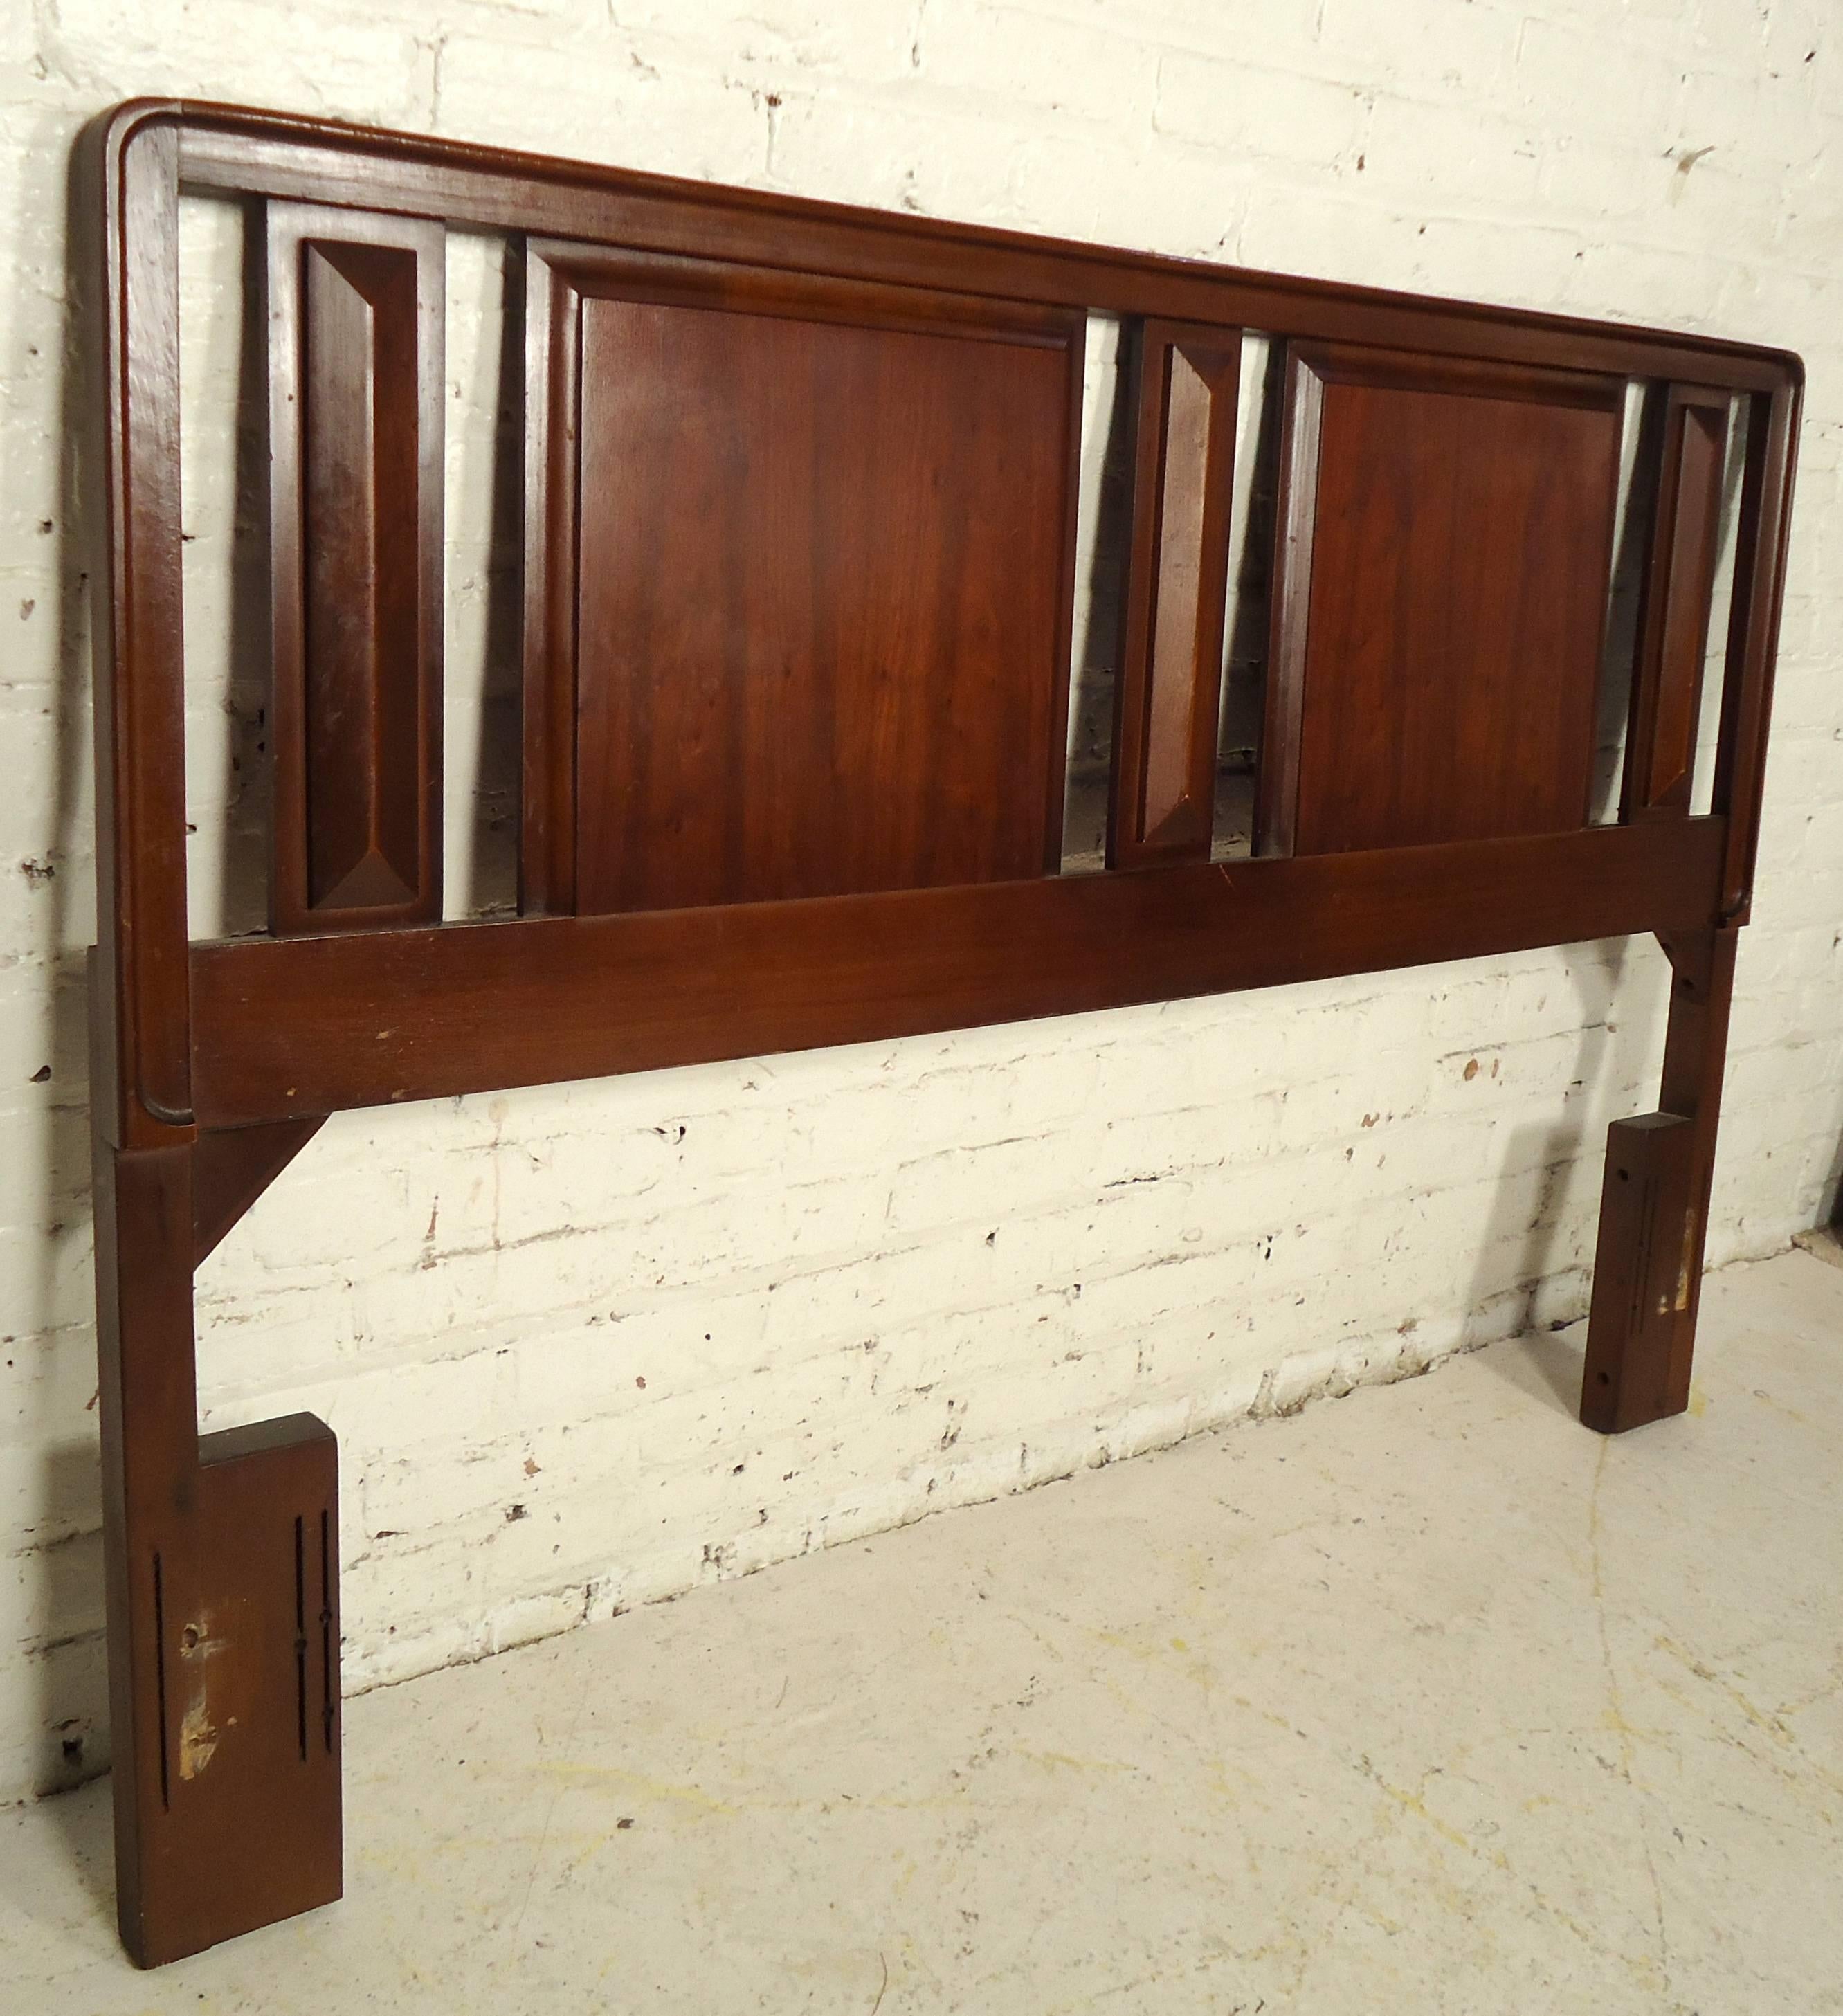 Vintage-modern headboard featuring beautifully sculpted back and walnut wood grain throughout.

Please confirm item location NY or NJ with dealer.